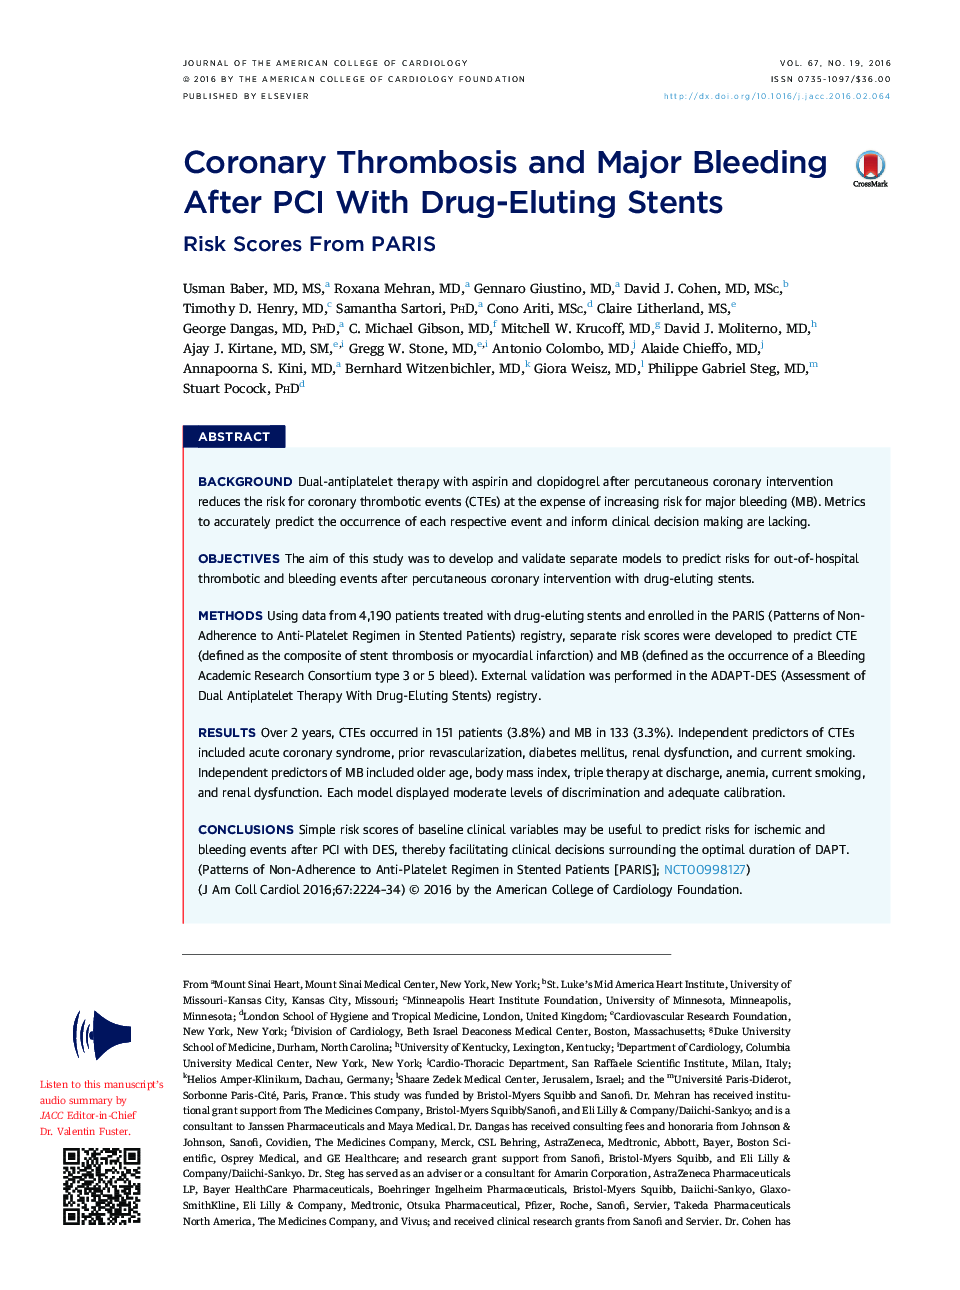 Coronary Thrombosis and Major Bleeding After PCI With Drug-Eluting Stents: Risk Scores From PARIS